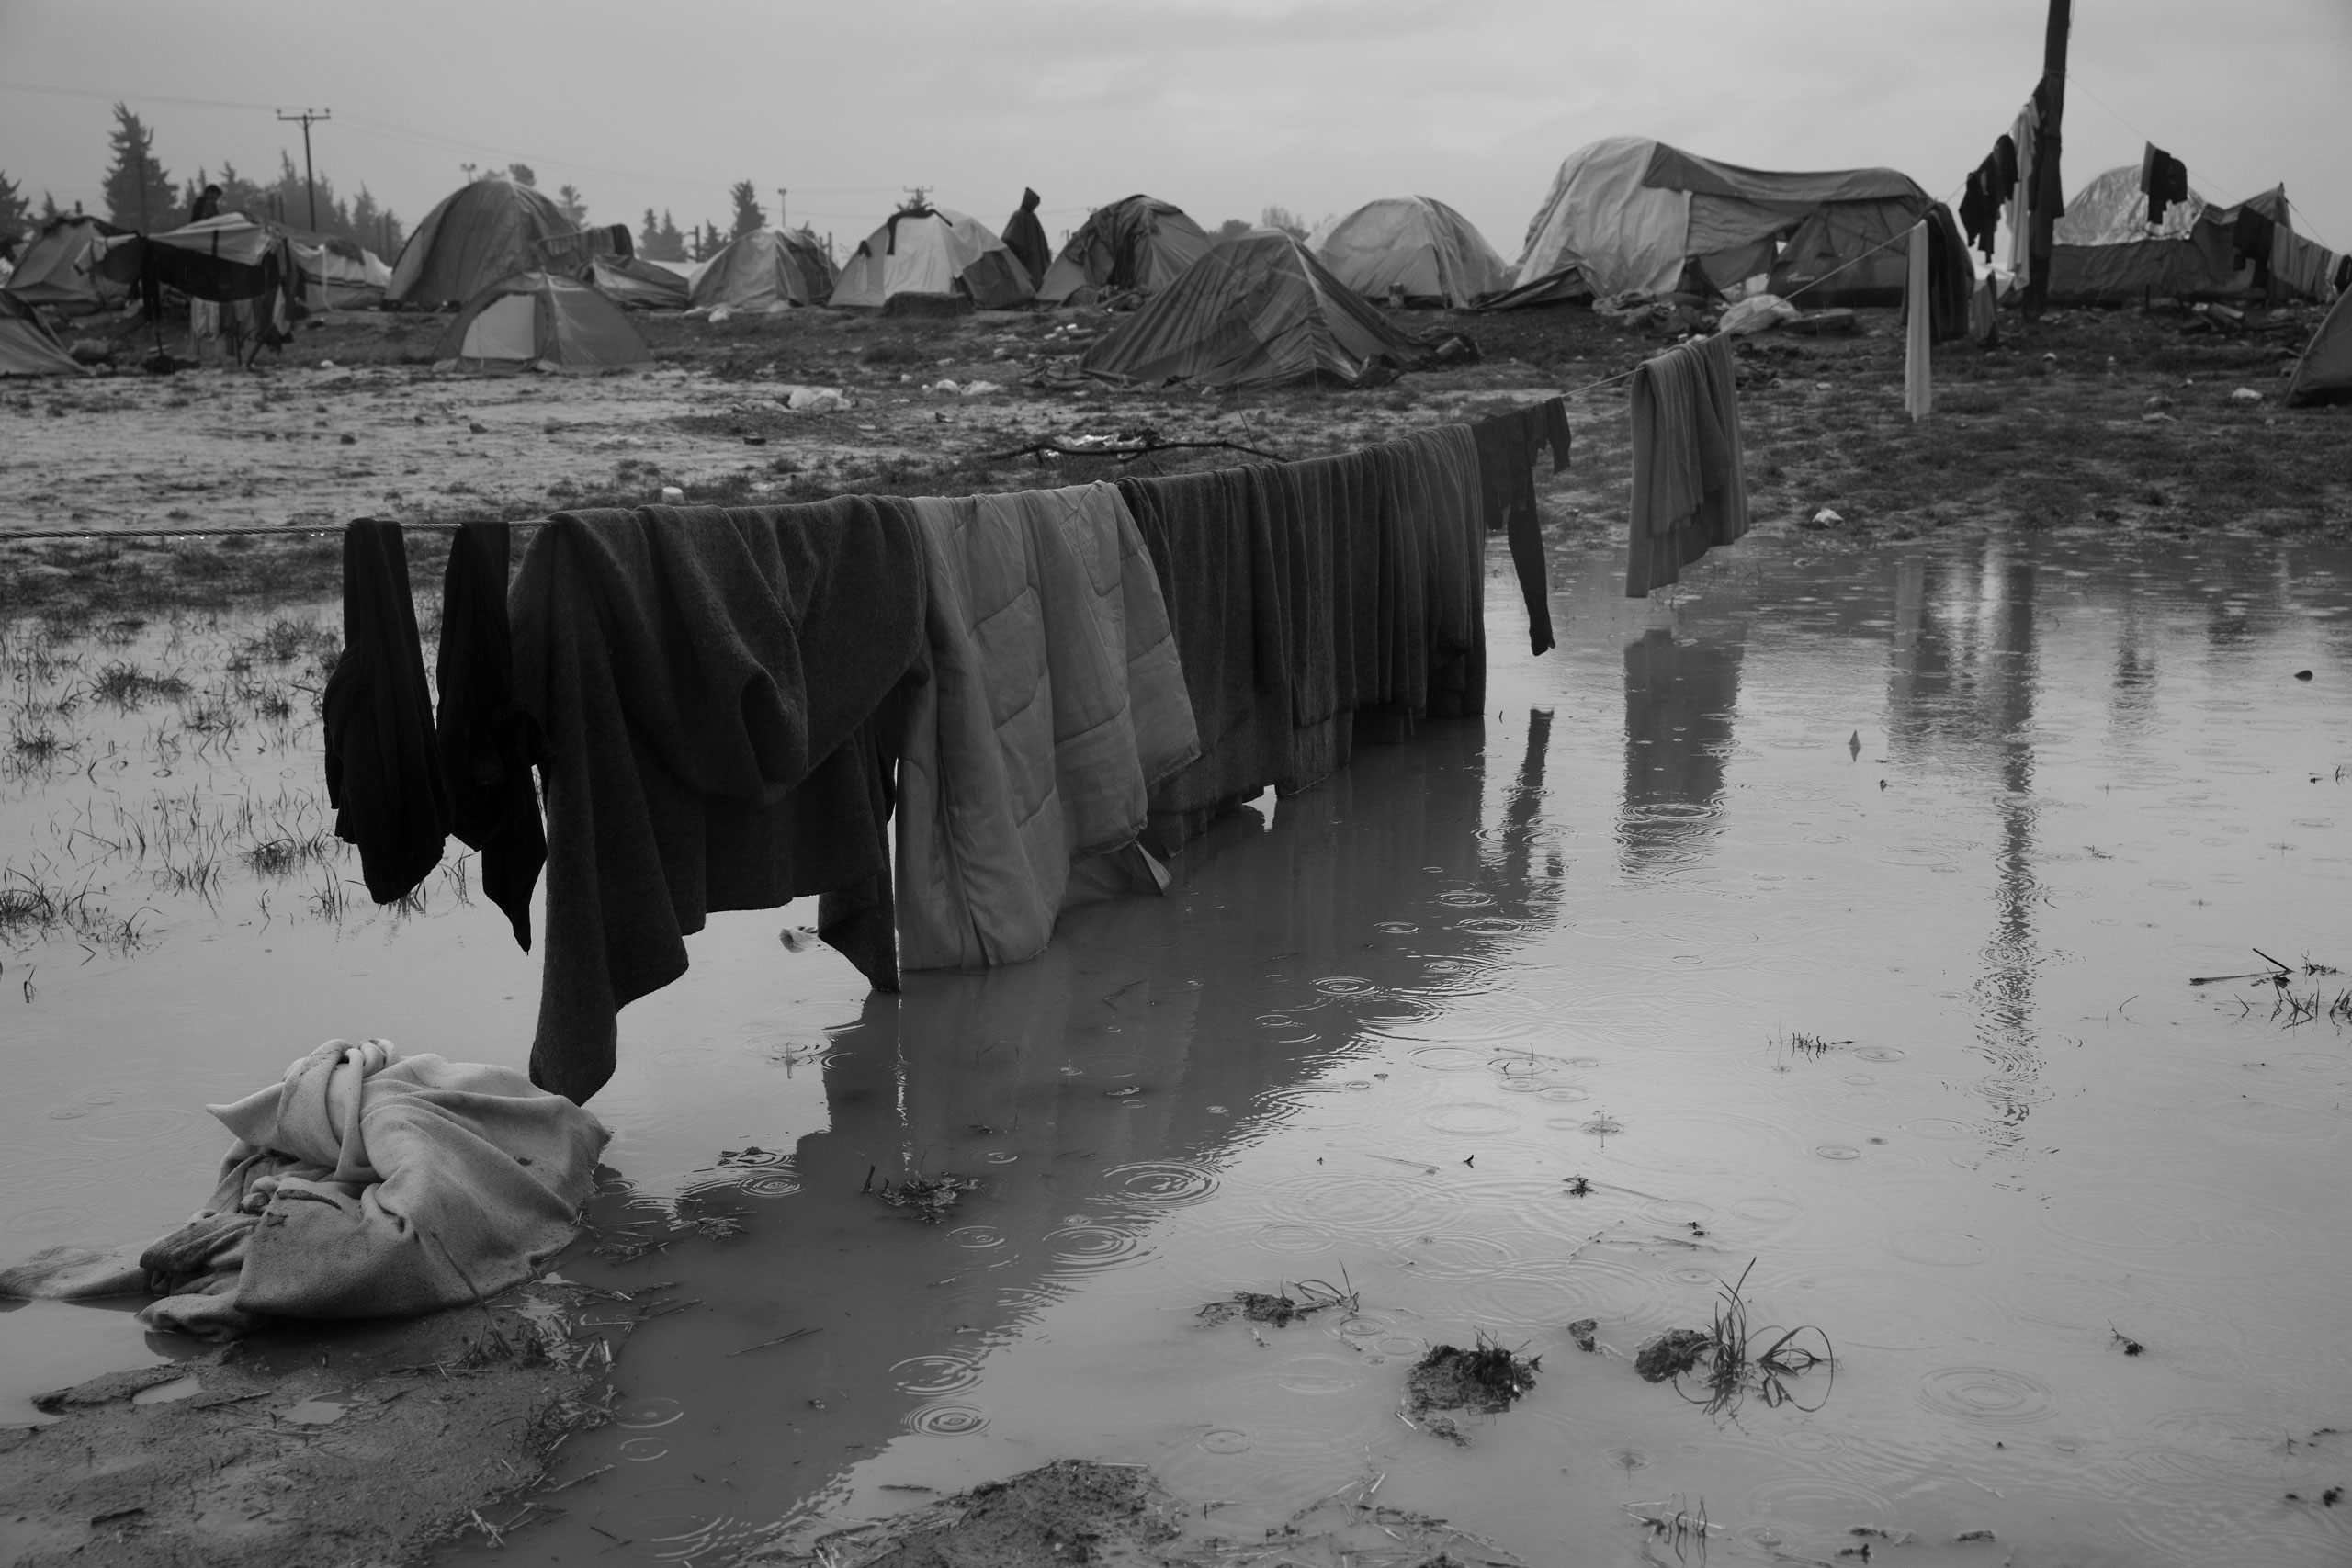 Laundry hangs on a line in the sprawling camp for refugees near the village of Idomeni, Greece at the border with Macedonia, where thousands are now stranded unable to make their way north, March 13, 2016.